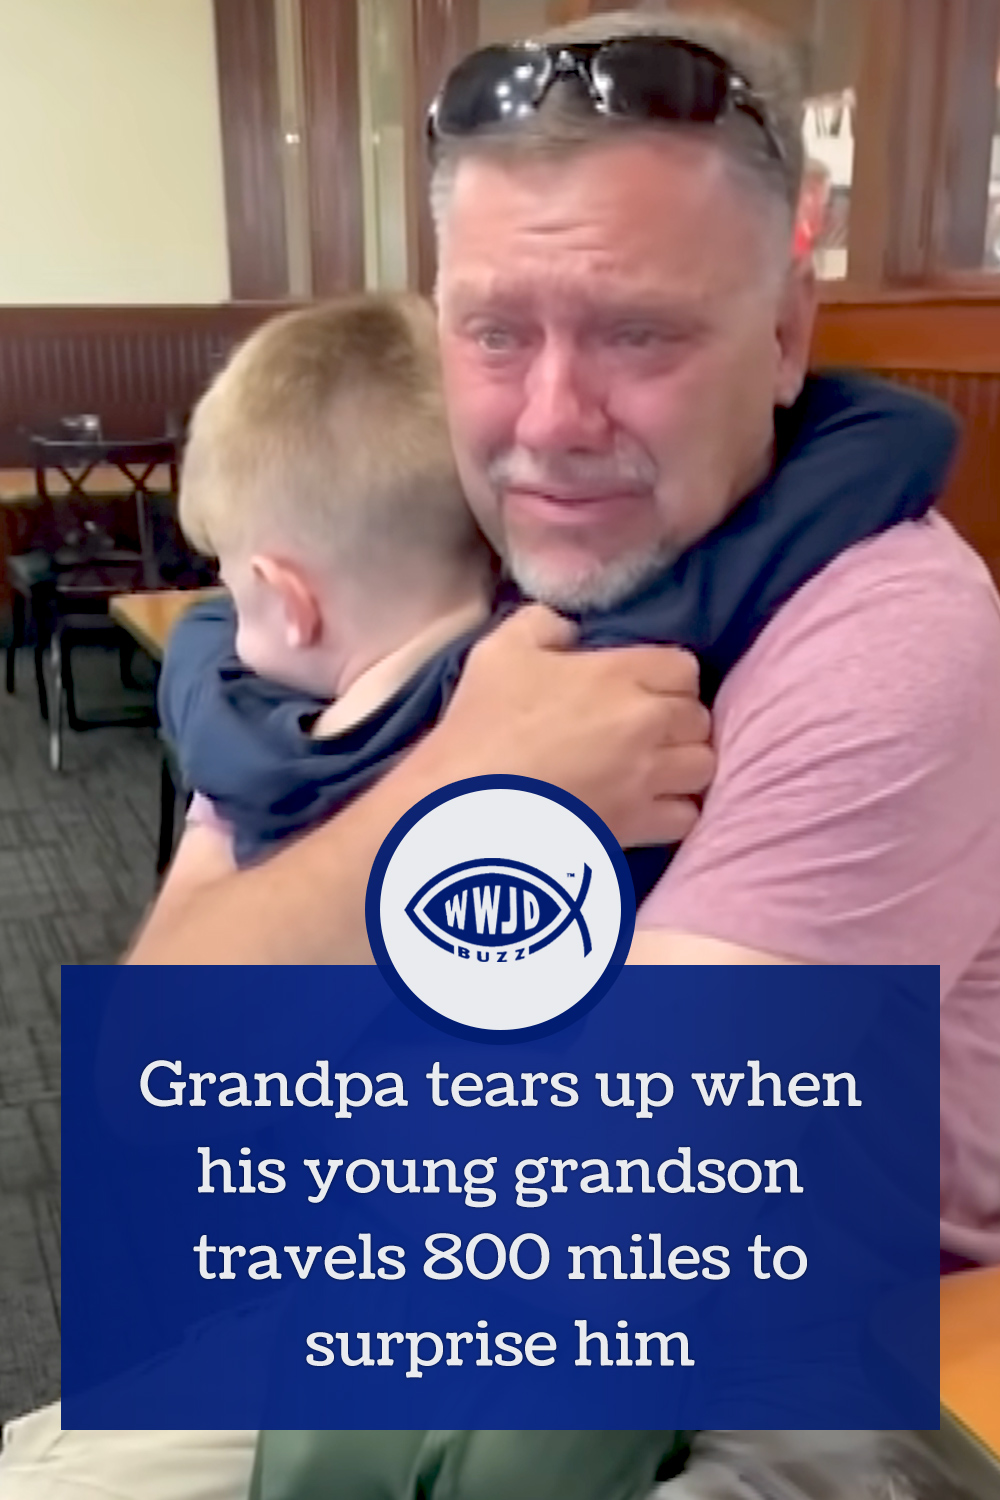 Grandpa tears up when his young grandson travels 800 miles to surprise him